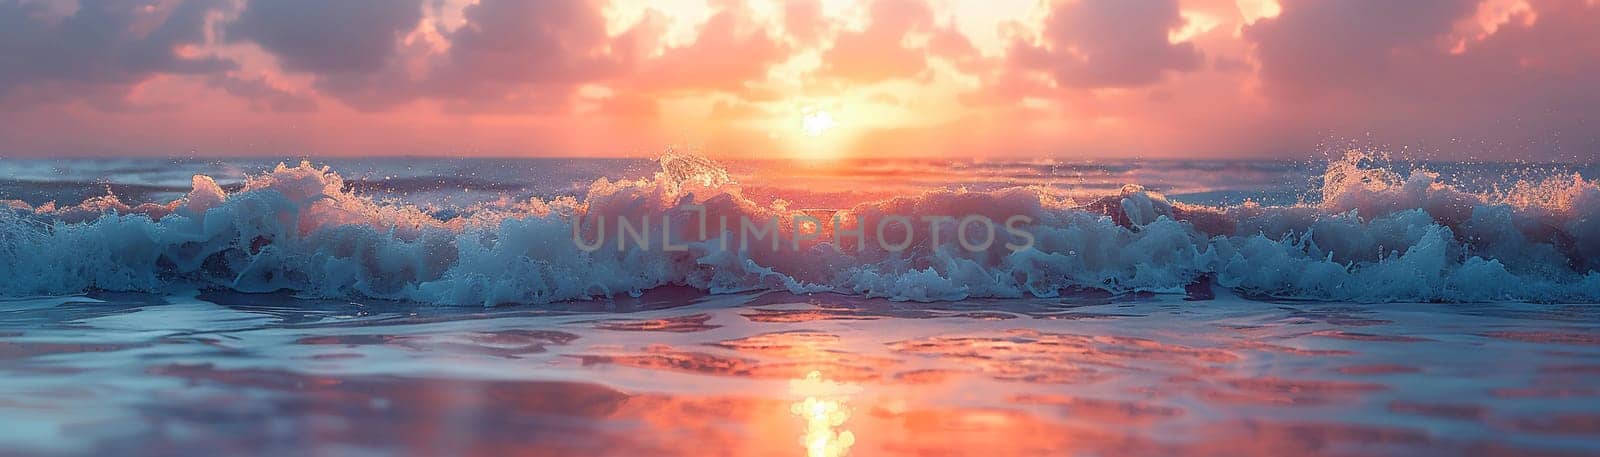 Sunset Hues Casting Warm Glow Over Serene Ocean Waves, The fading light blurs into the calm sea, highlighting the peaceful end to a coastal day.